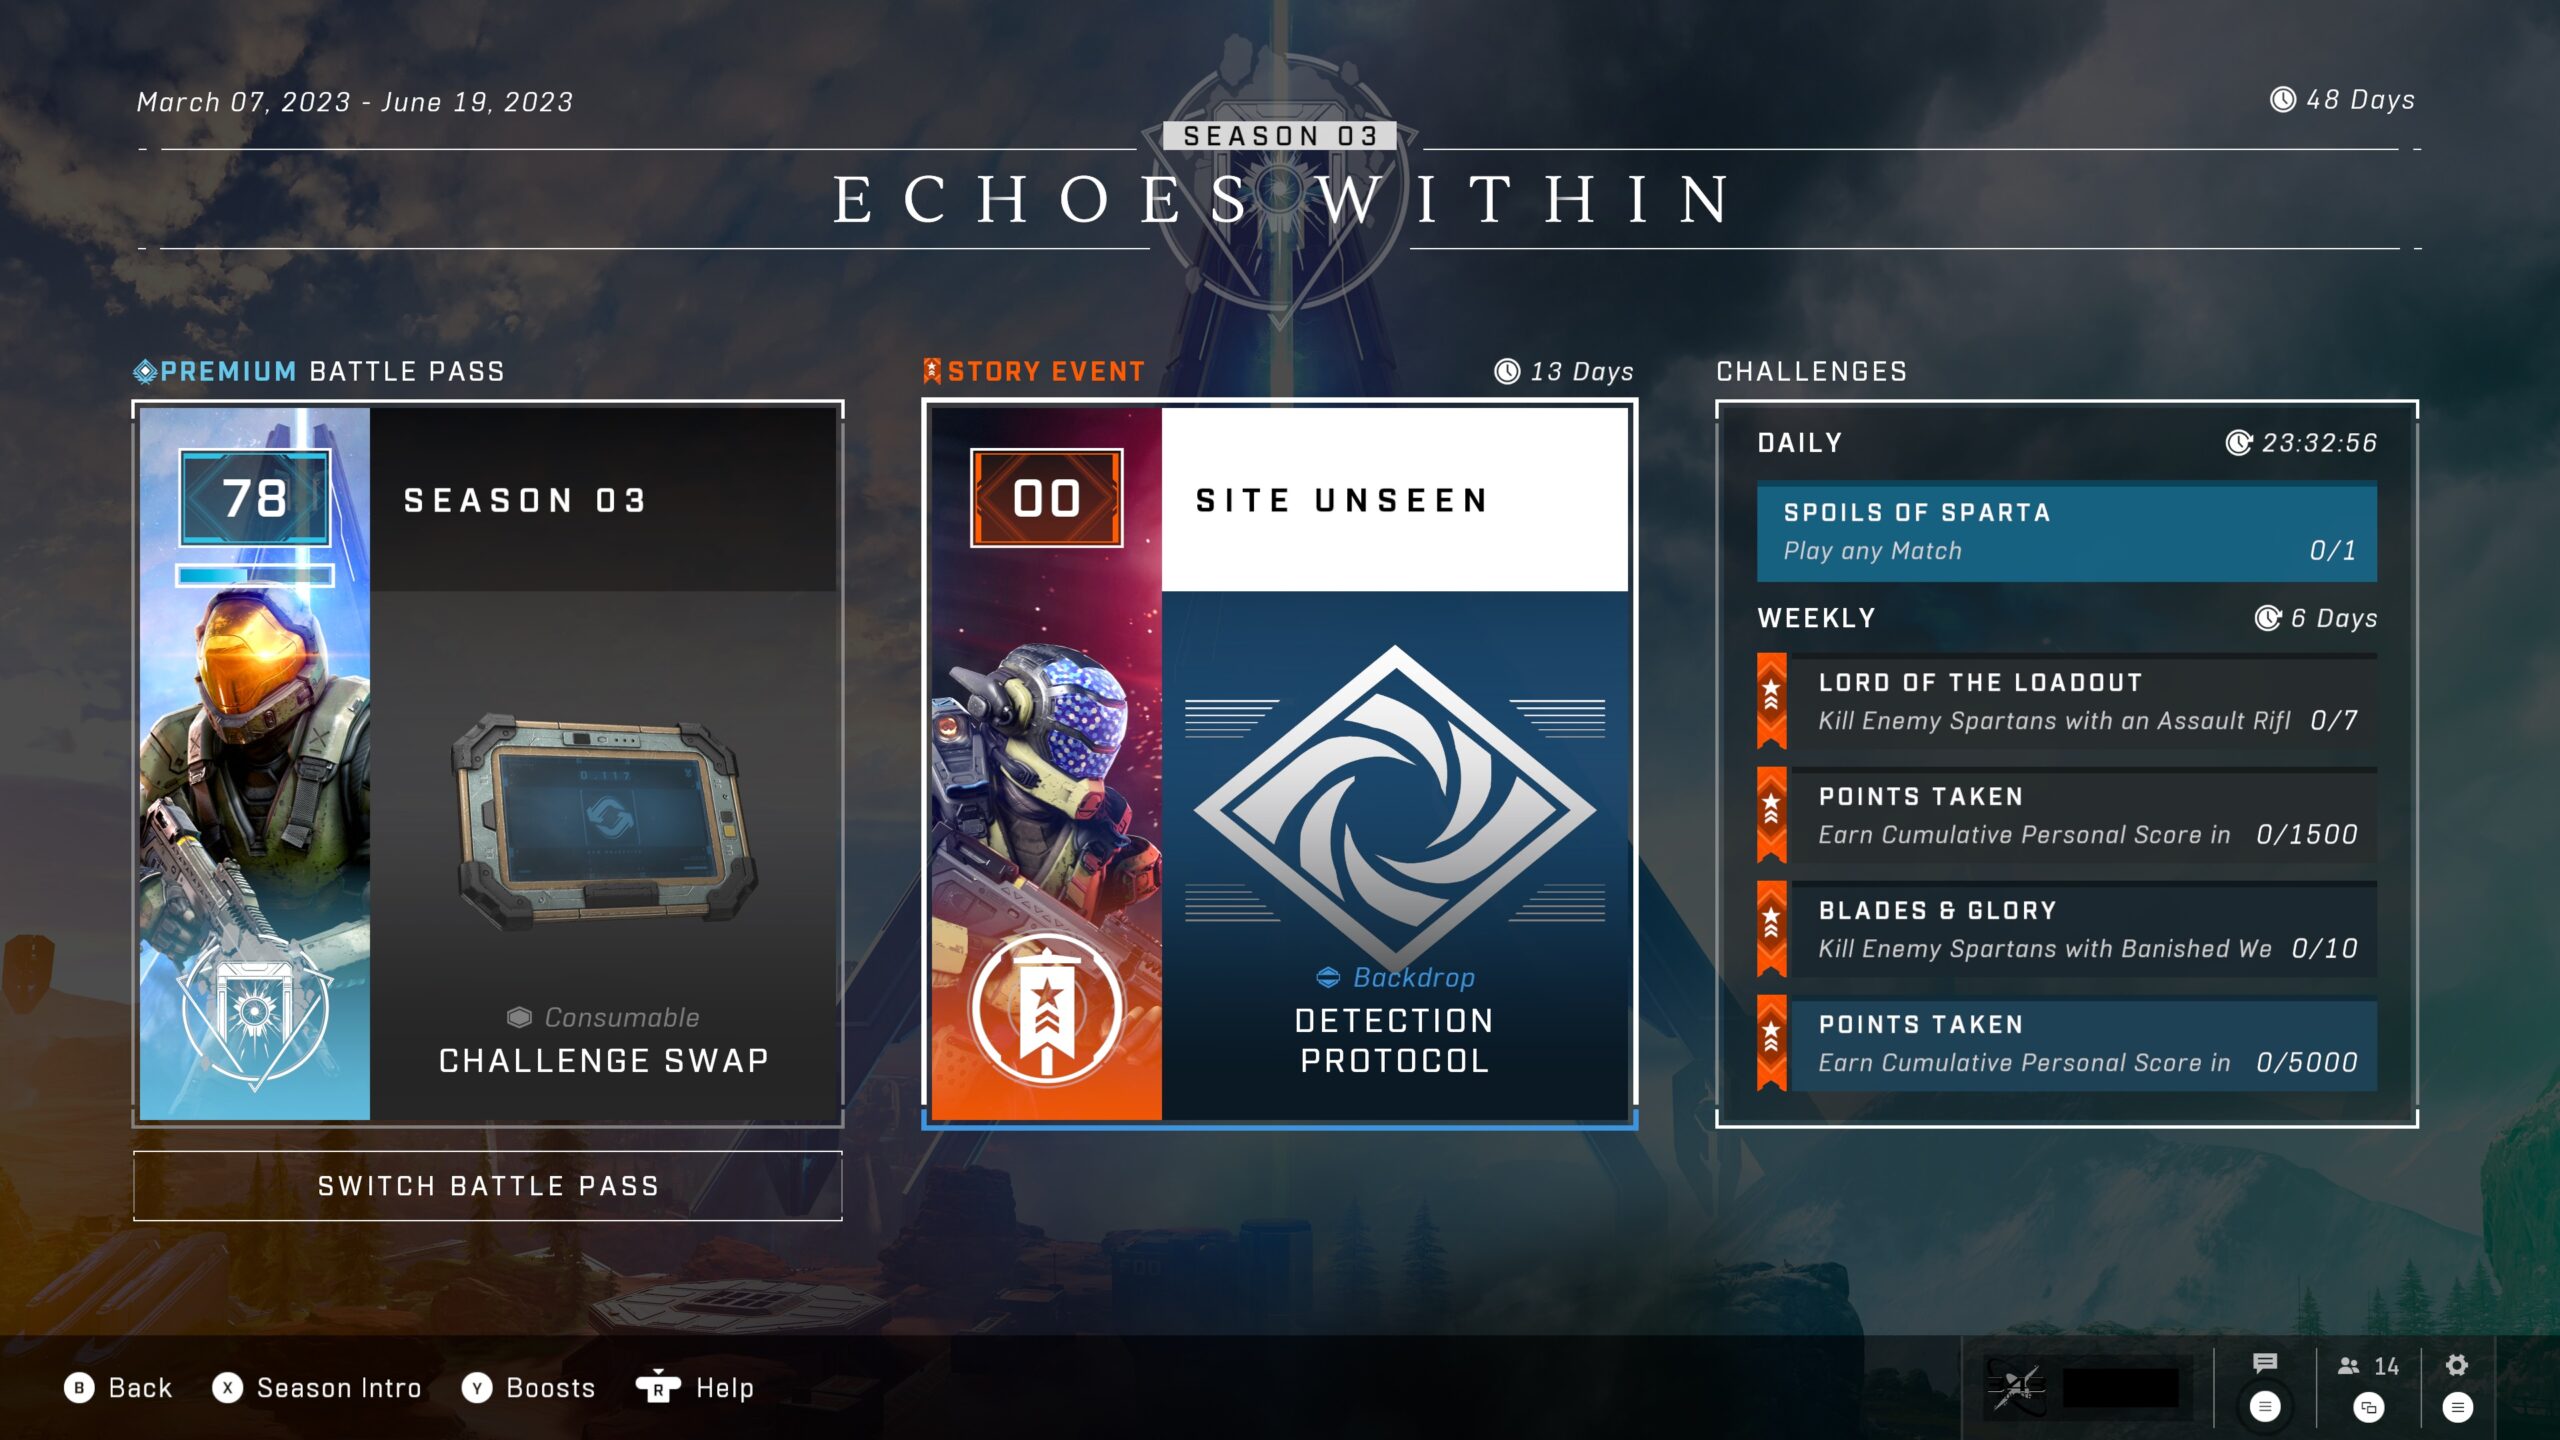 Halo Infinite screenshot of Echoes Within menu showing Battle Pass, Story Event, and Challenges